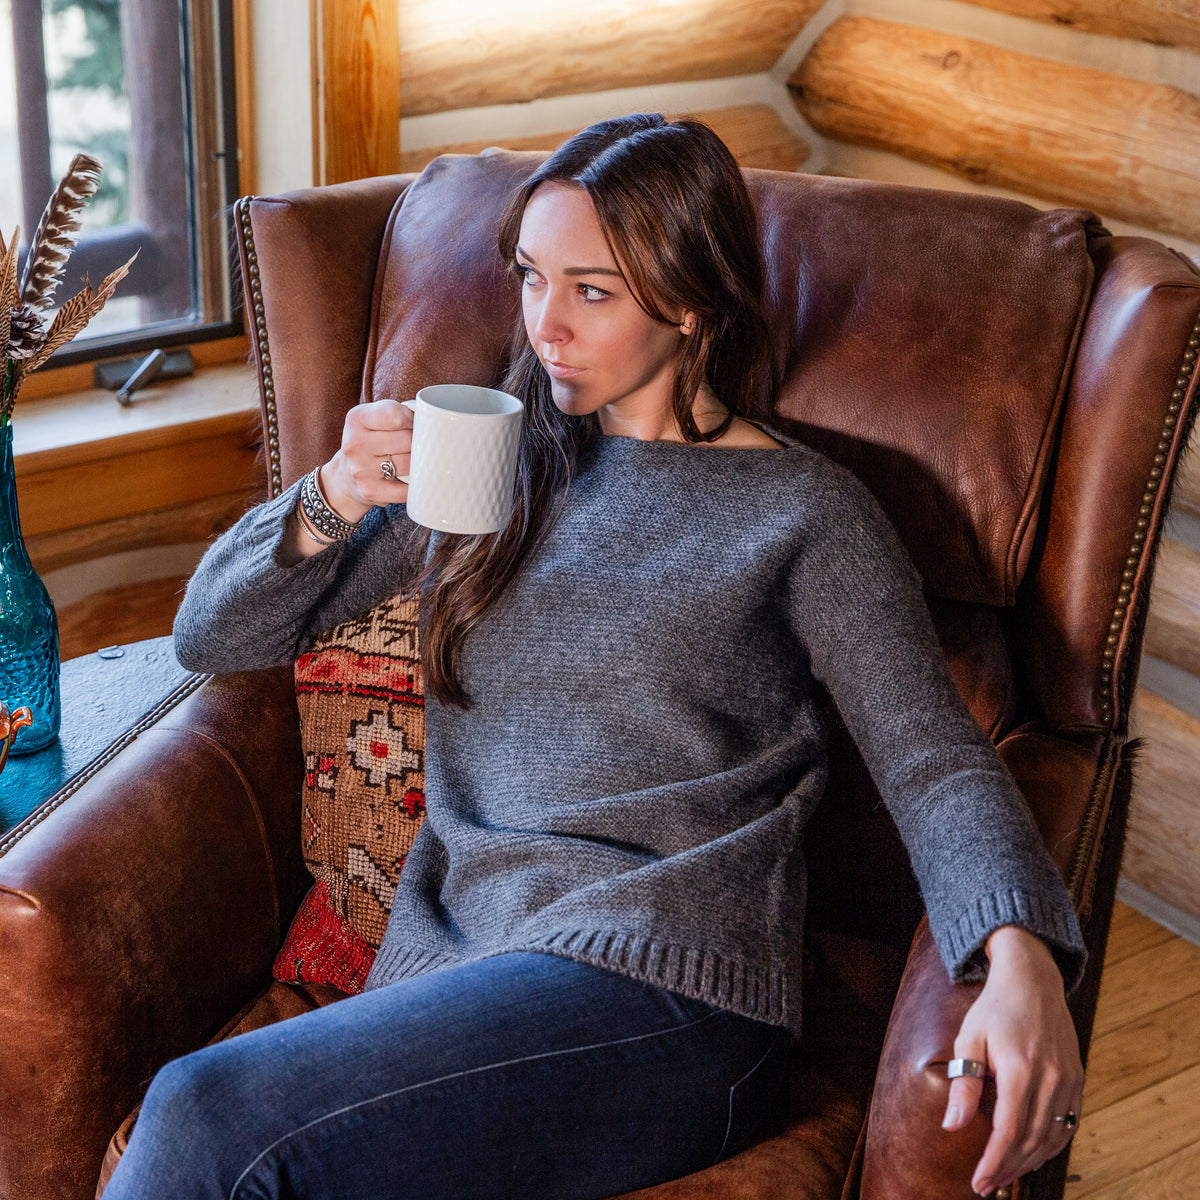 A brown-haired woman sitting in a leather chair inside of a cabin sipping from a white mug wearing blue jeans and a soft elegant comfortable fashionable cozy sweater in the color gray.